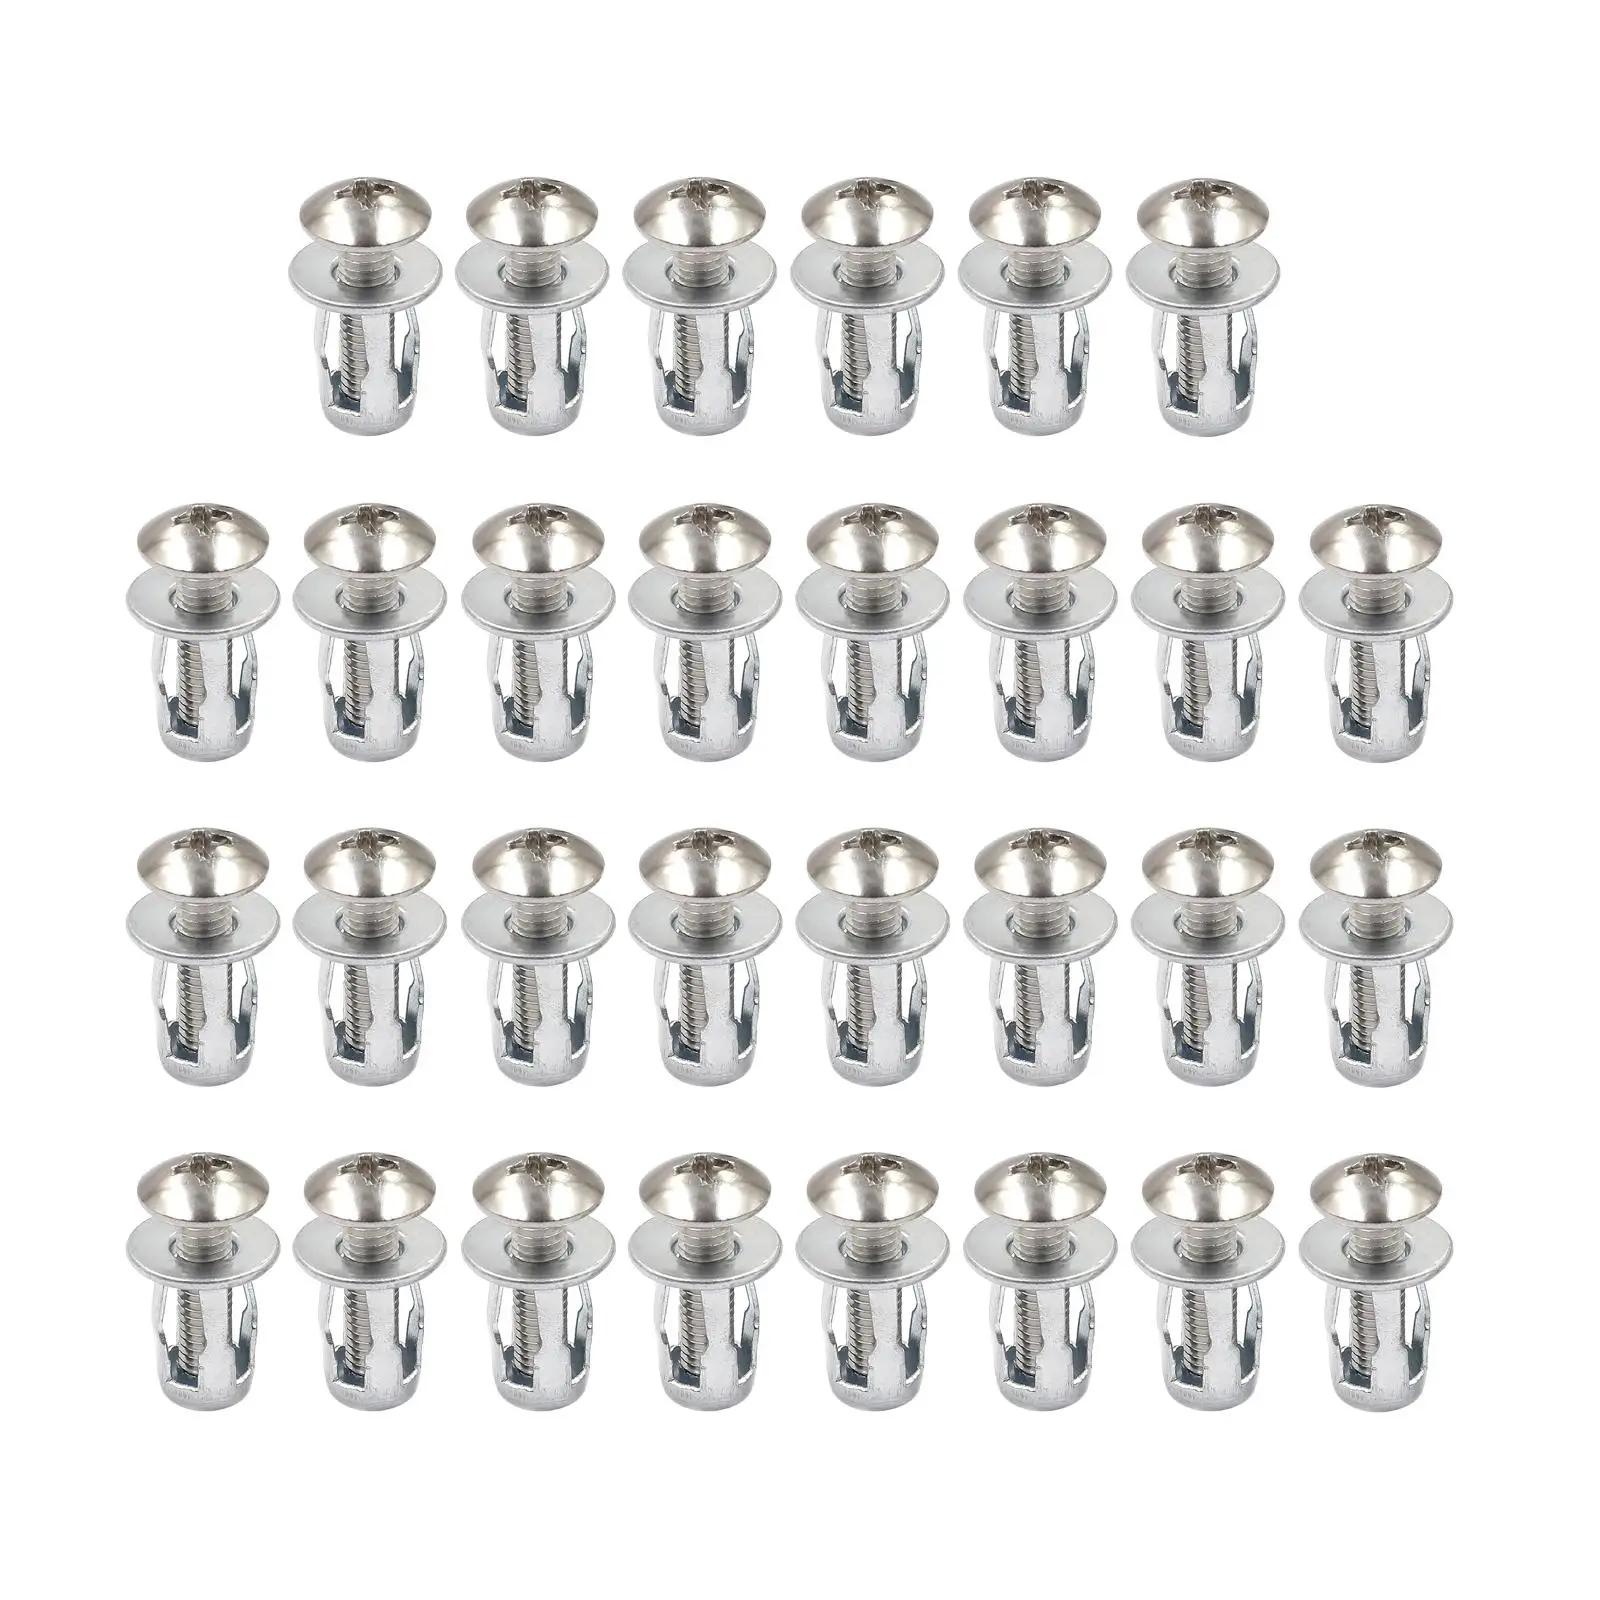 30 Pieces Petal Screw Tool Expansion Bolt for Curtain Installation Lamp Installation Gypsum Board Fixing Curtains Wall Cabinets